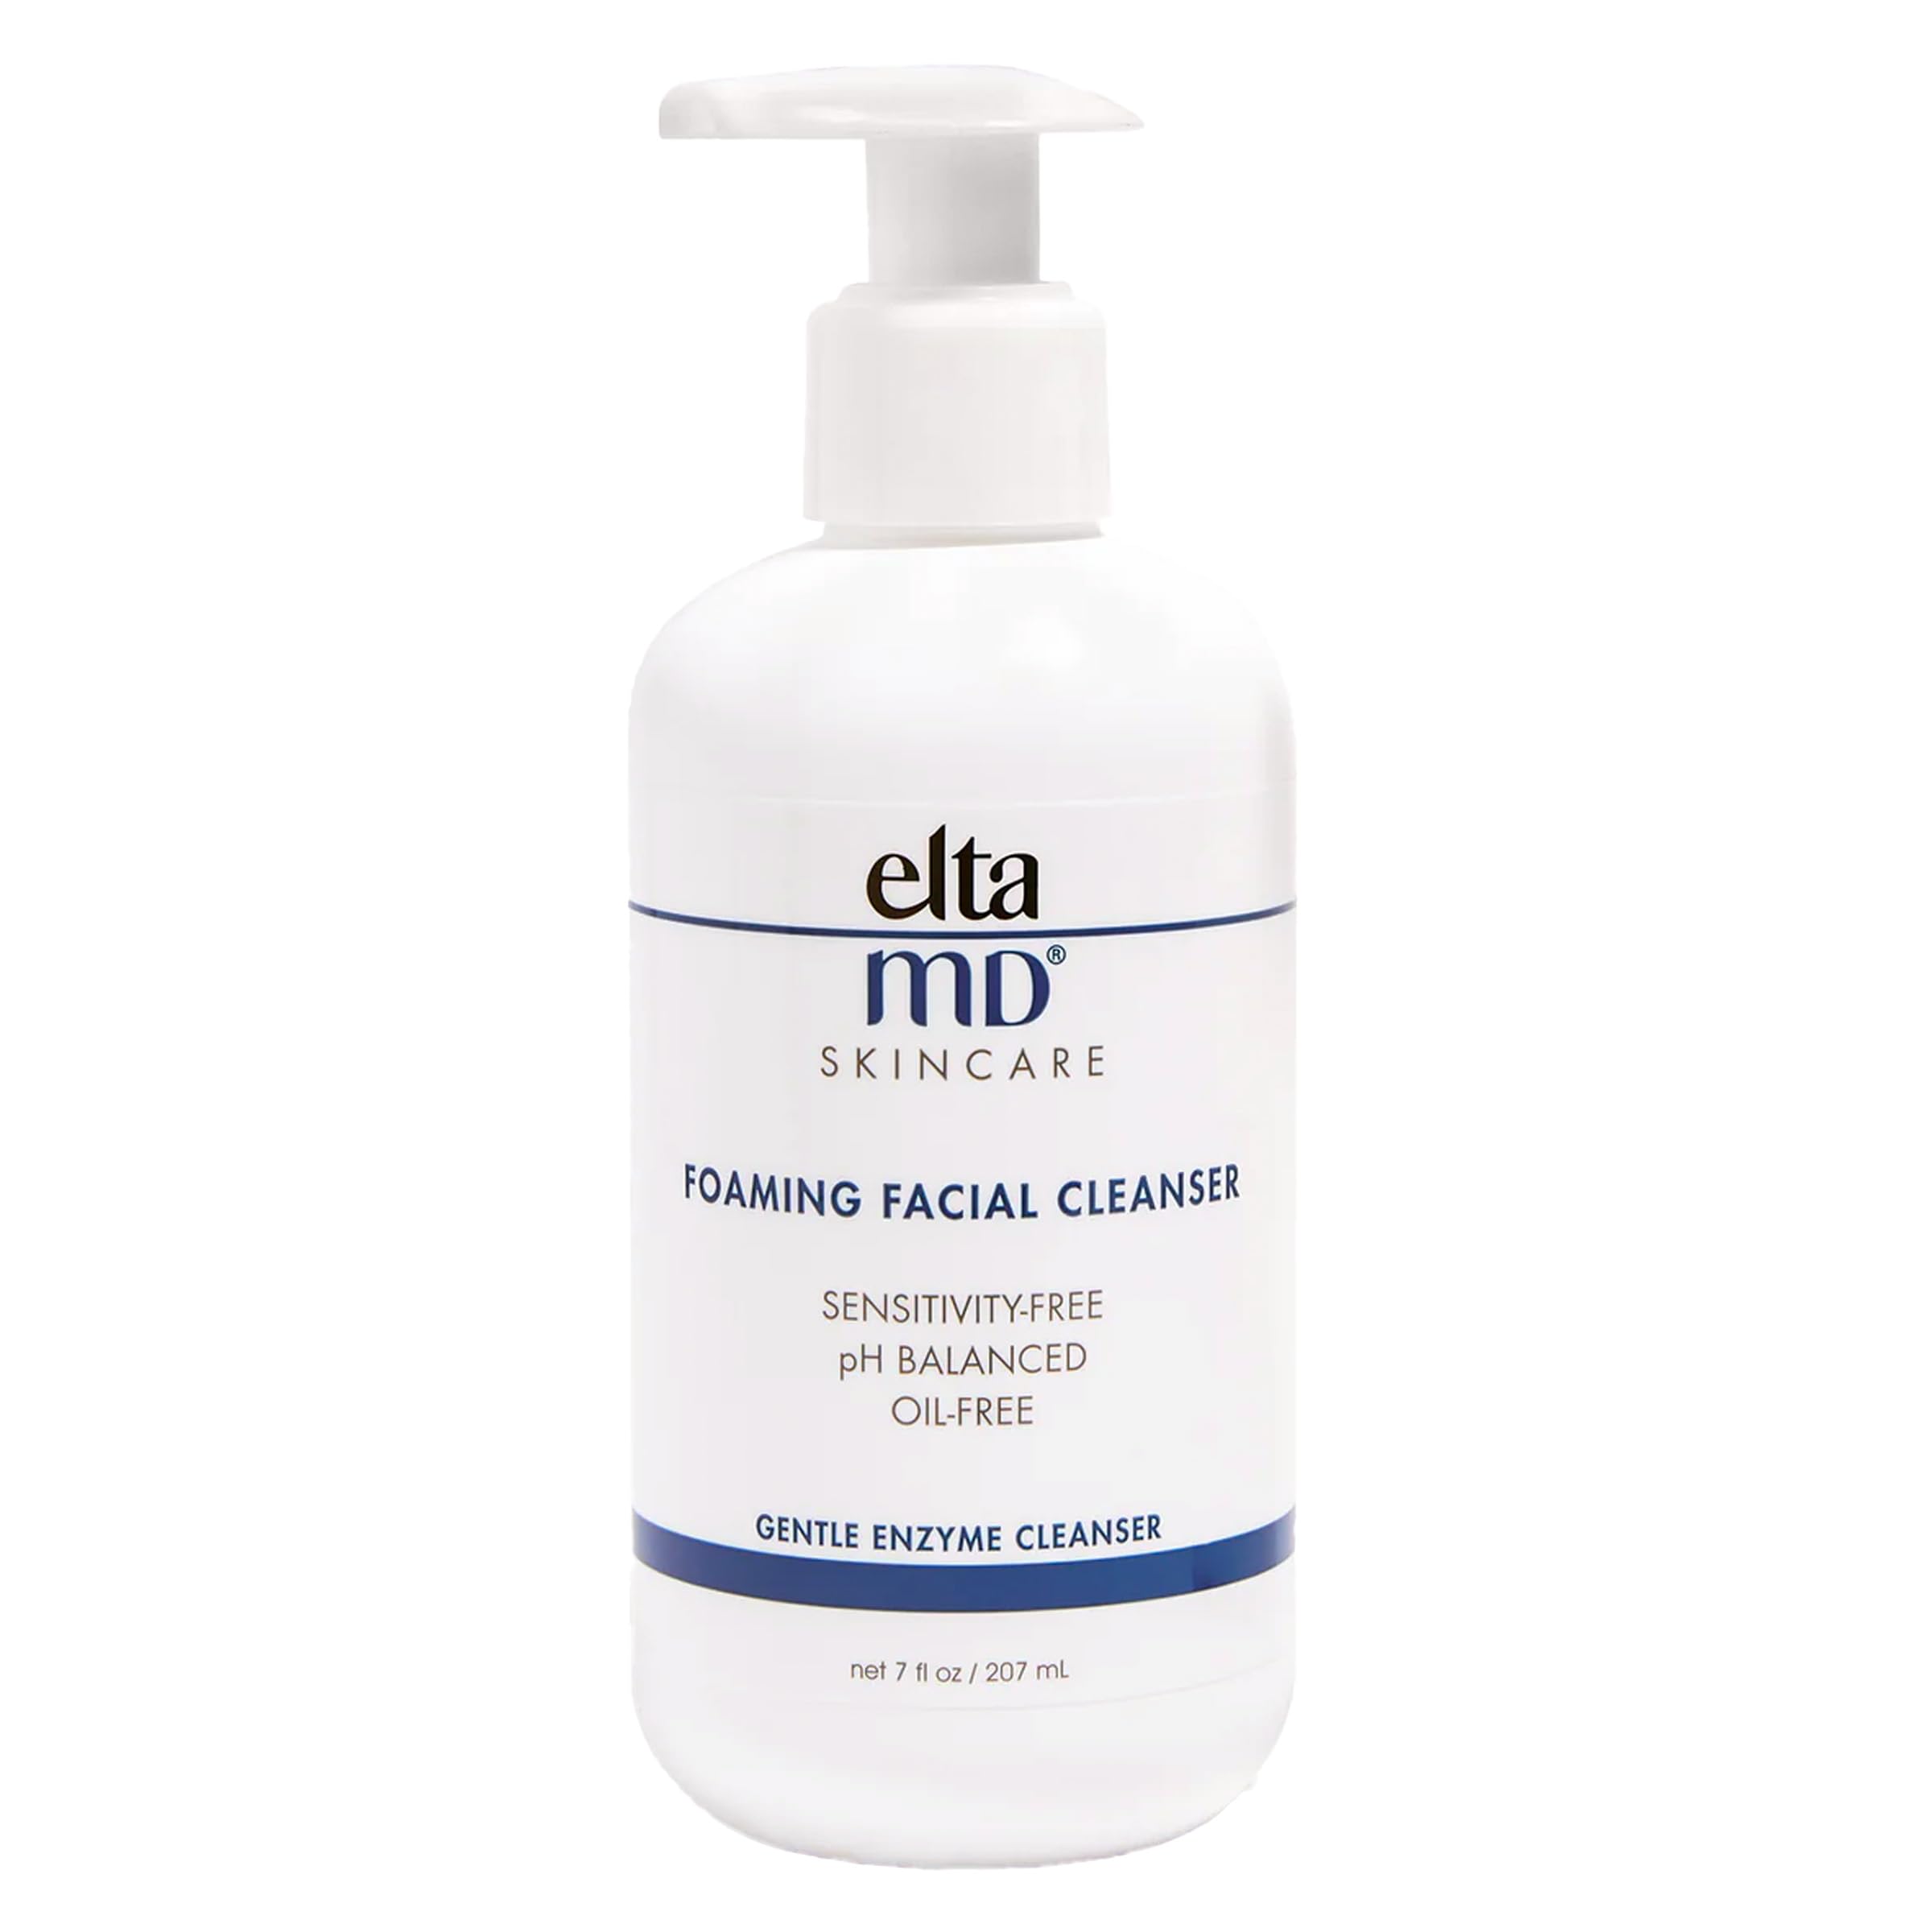 EltaMD Foaming Facial Cleanser, Foaming Face Wash for Oily Skin, Gently Cleanses and Helps Remove Oil and Dead Skin Cells, Daily Face Wash for Morning and Night Use, For All Skin Types, 2.7 oz Pump